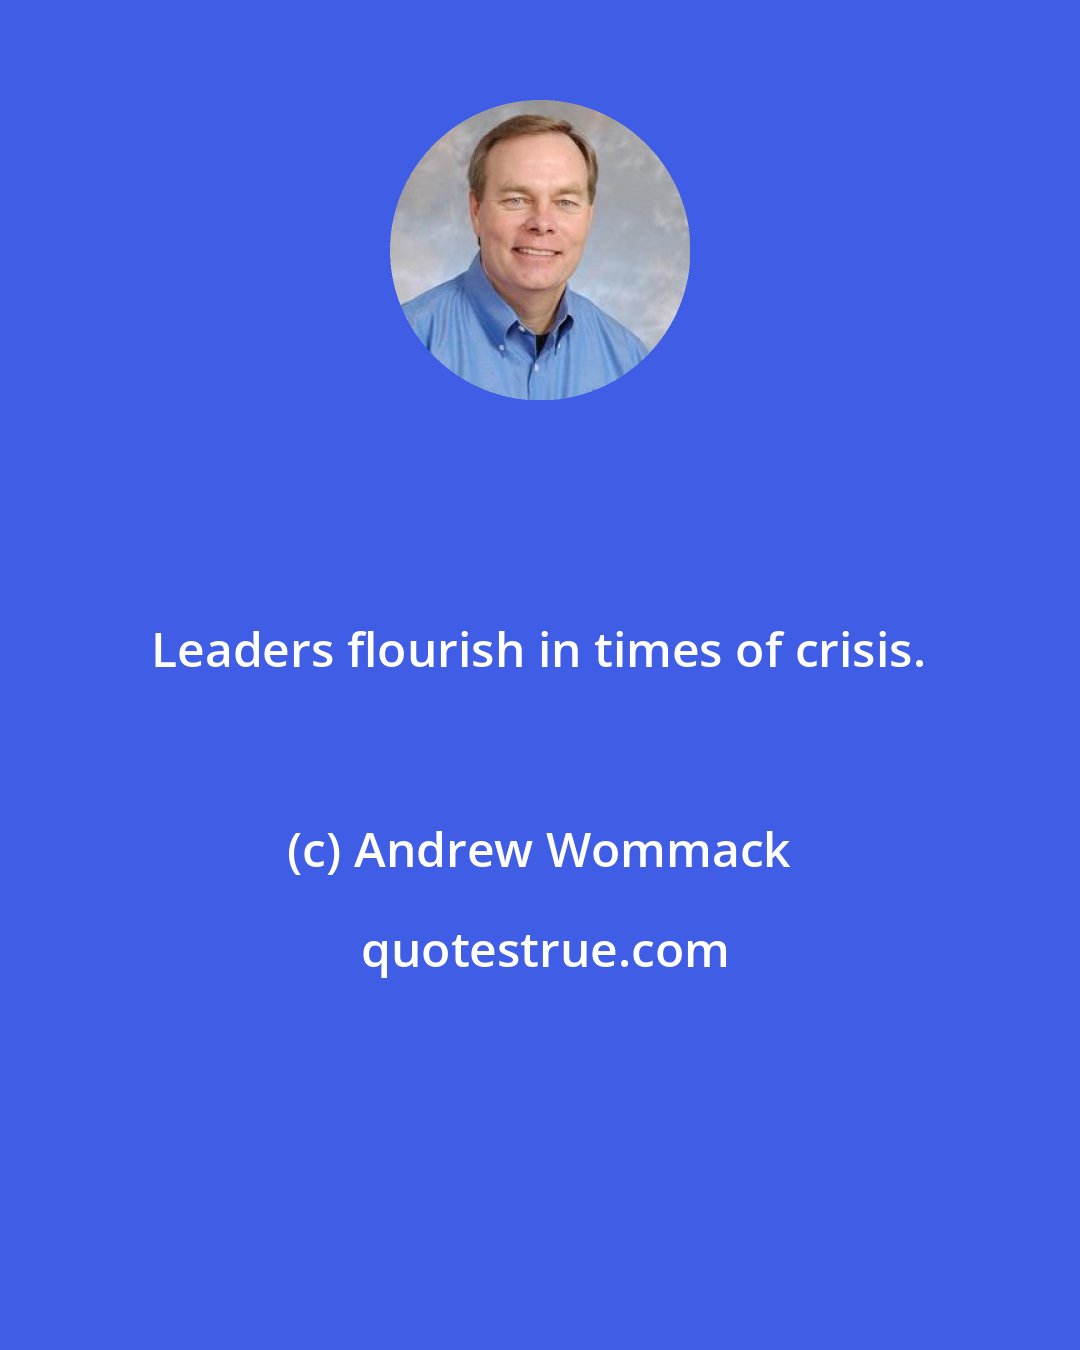 Andrew Wommack: Leaders flourish in times of crisis.